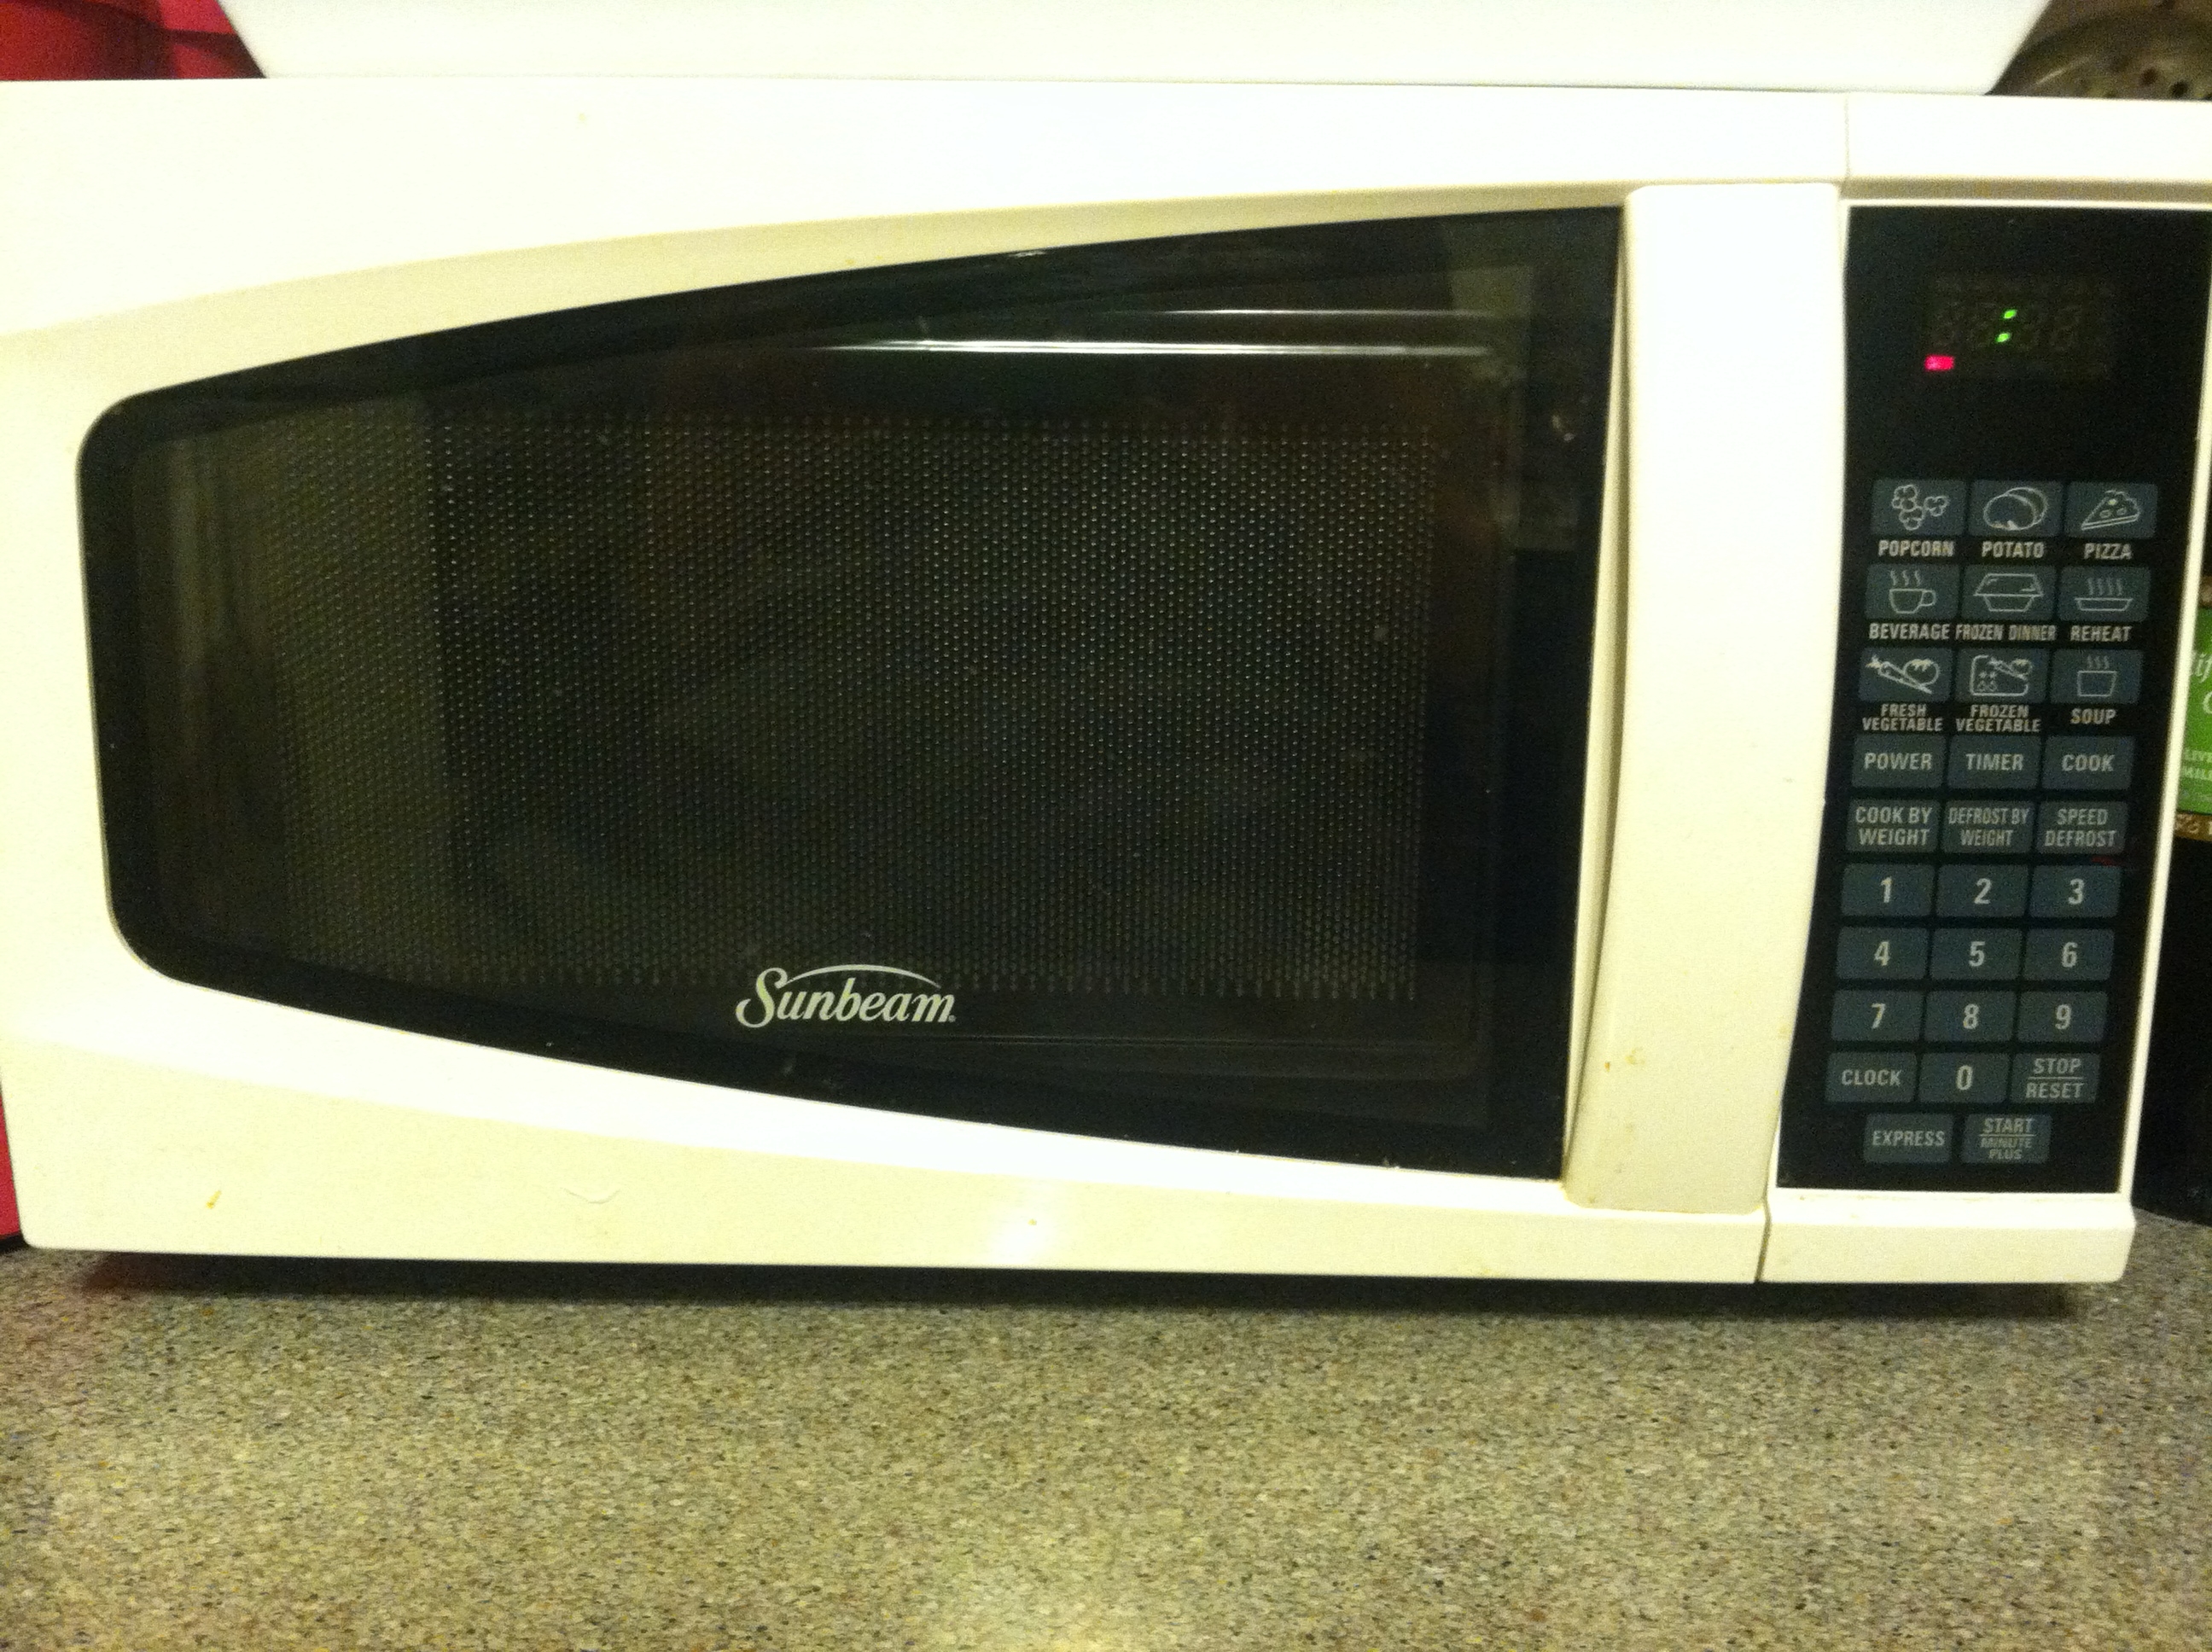 Modern Microwave Today is microwave oven day in | 2592 x 1936 · 2799 kB · jpeg